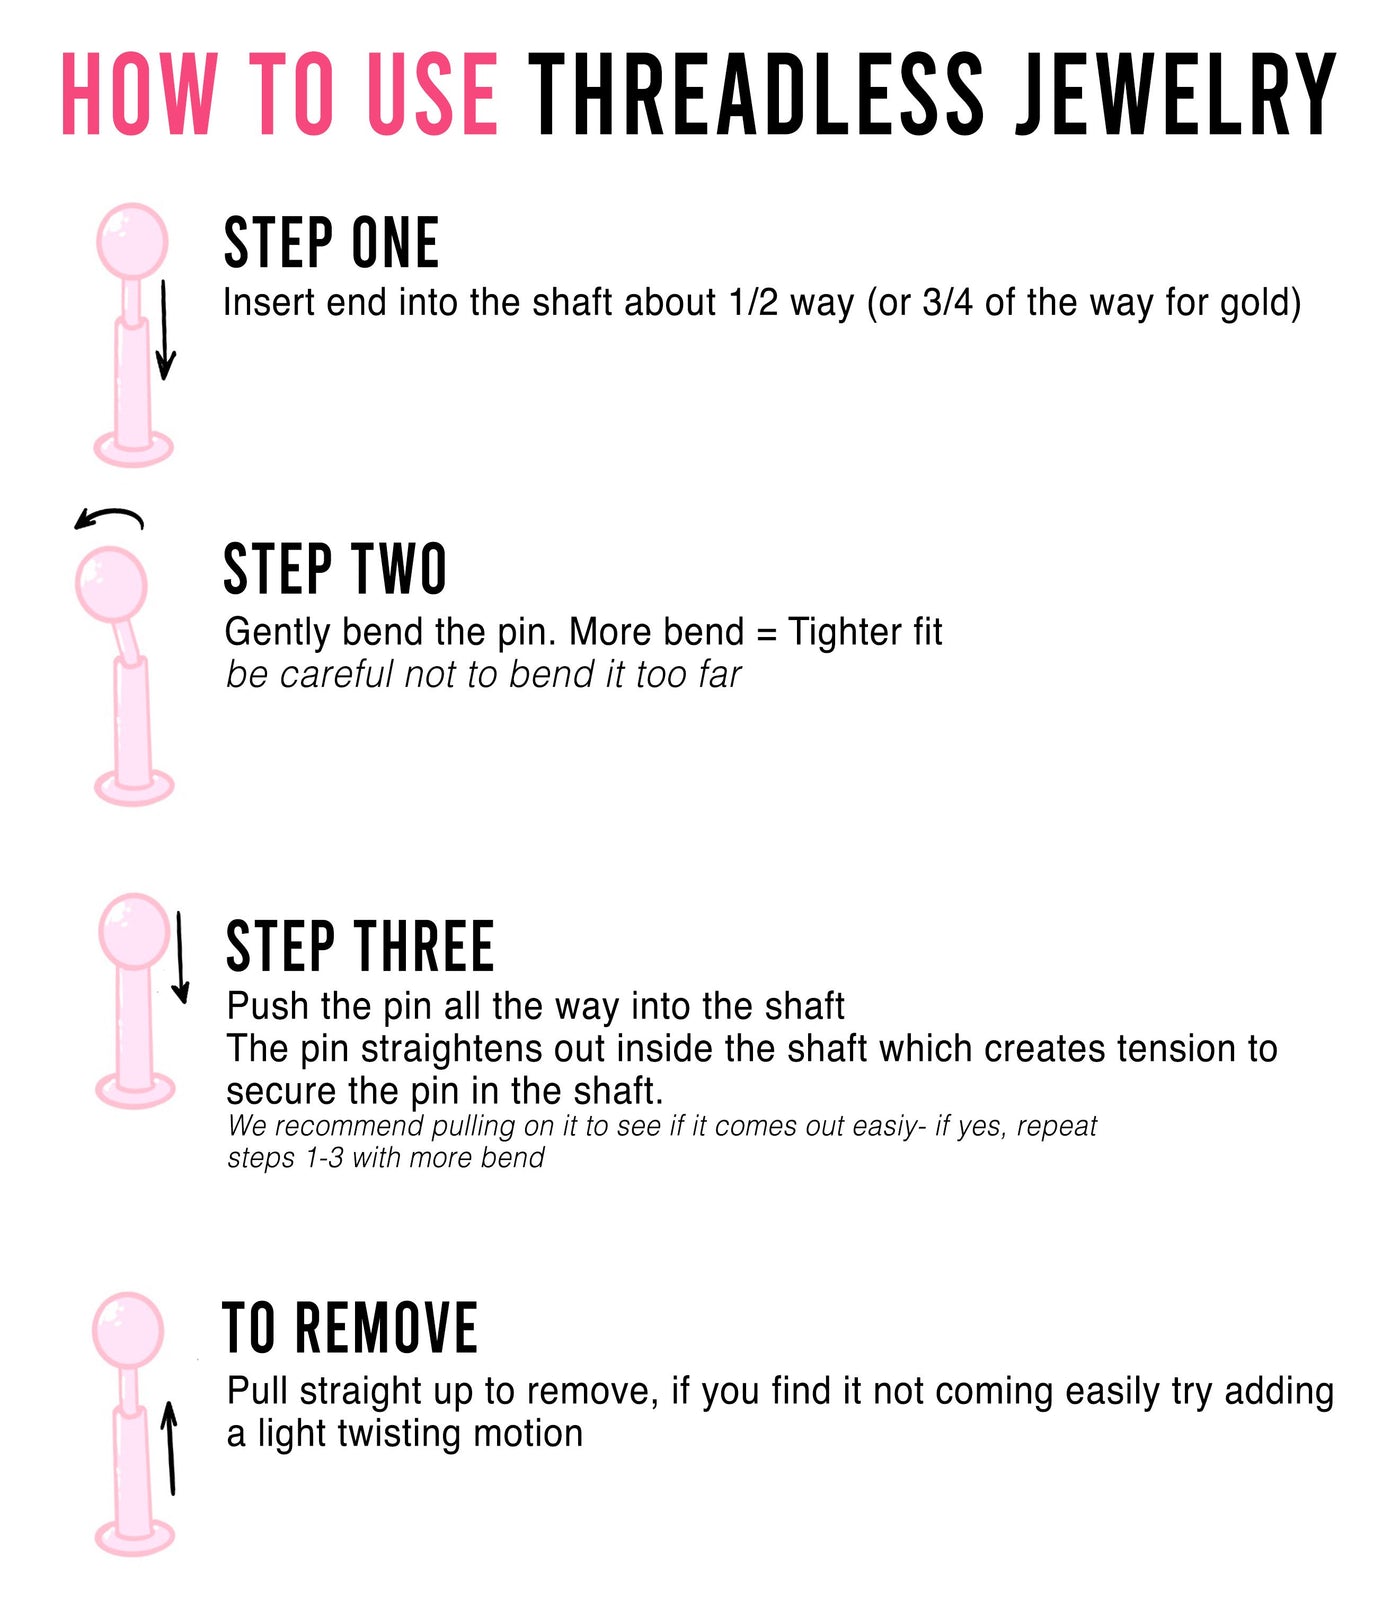 how to remove non threaded jewelry